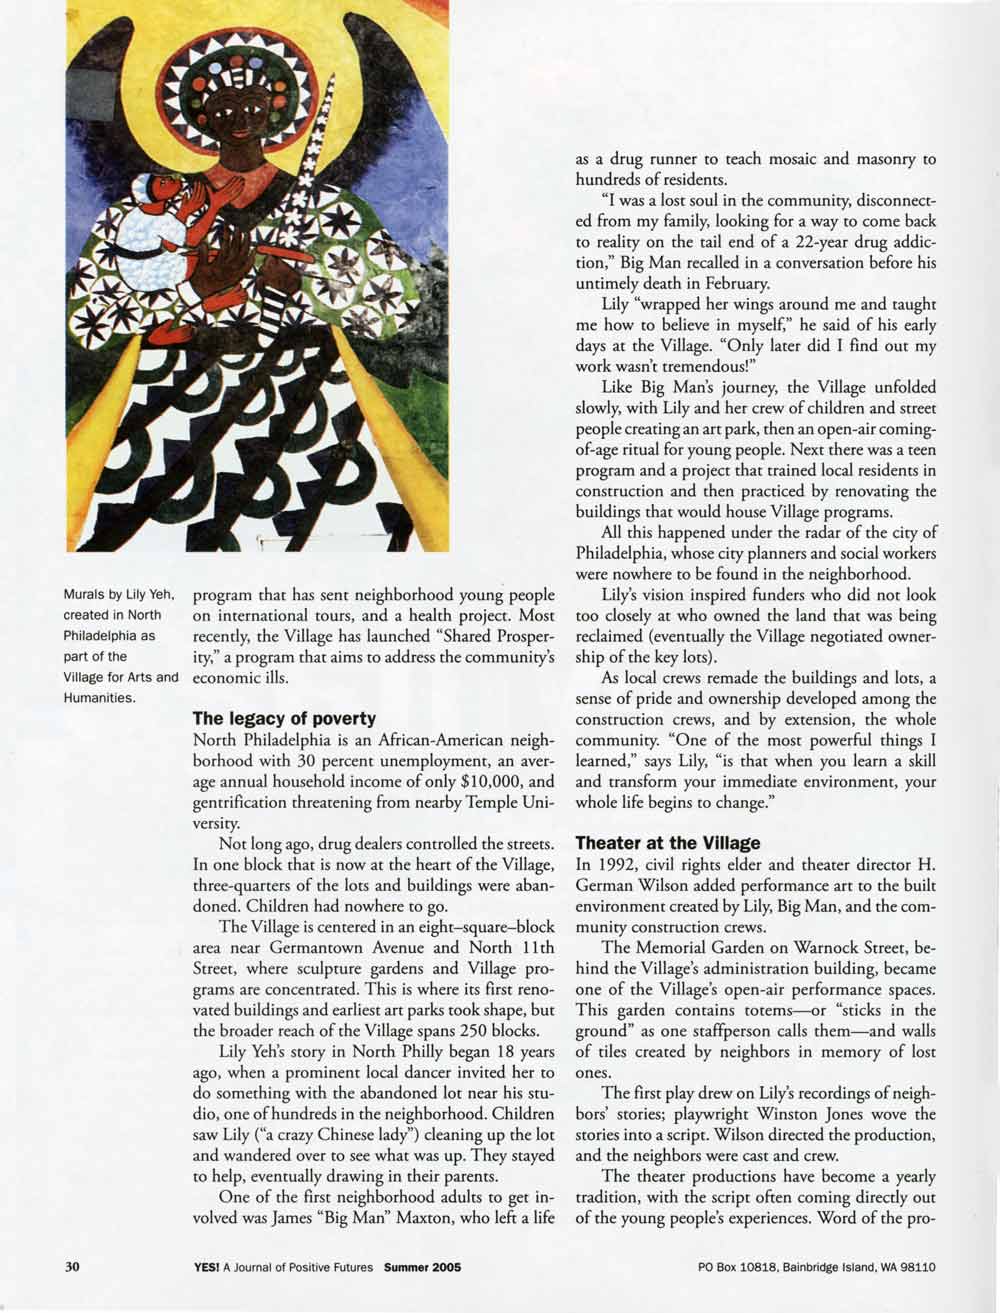 Lily Yeh article, pg 3